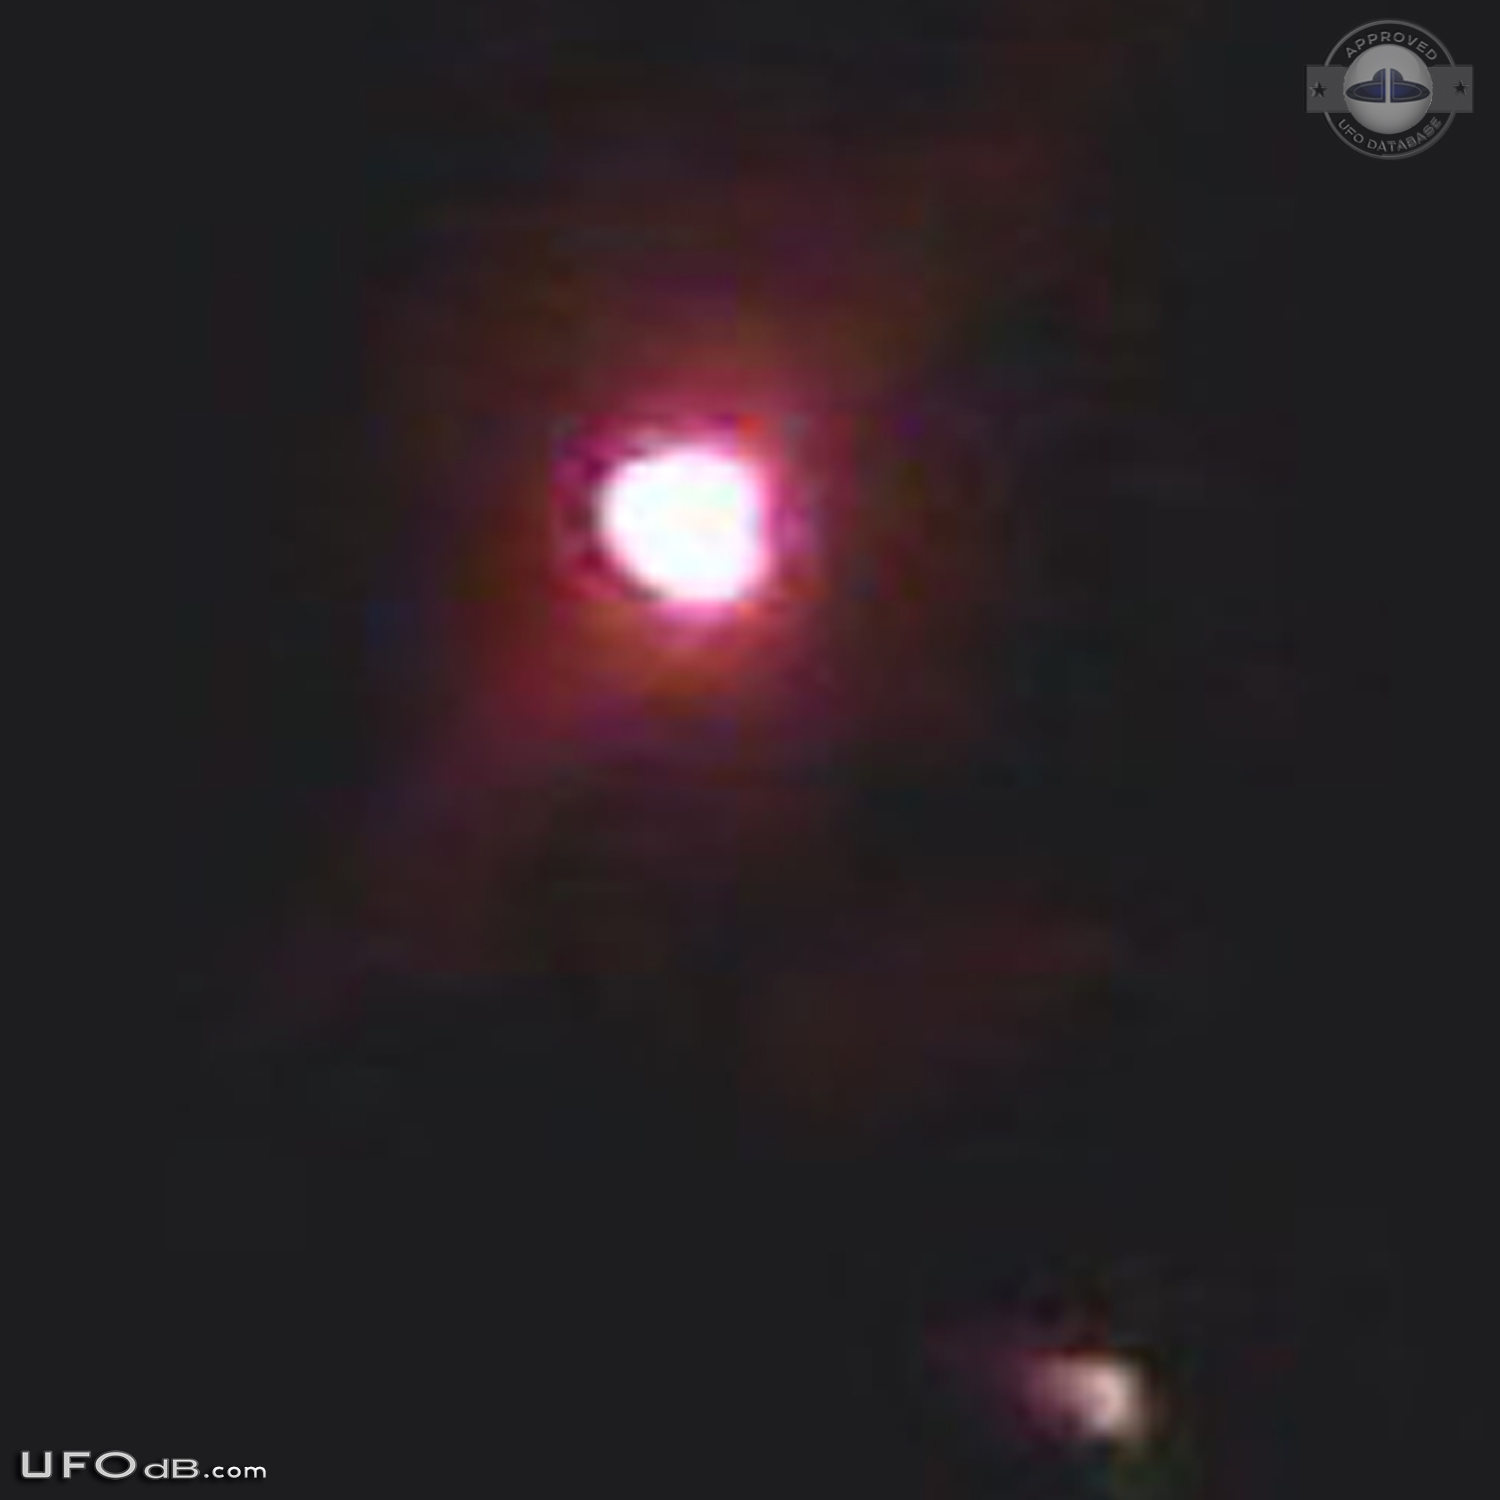 Bright glowing hovering sphere UFO over St Louis Missouri - 2014 UFO Picture #560-4